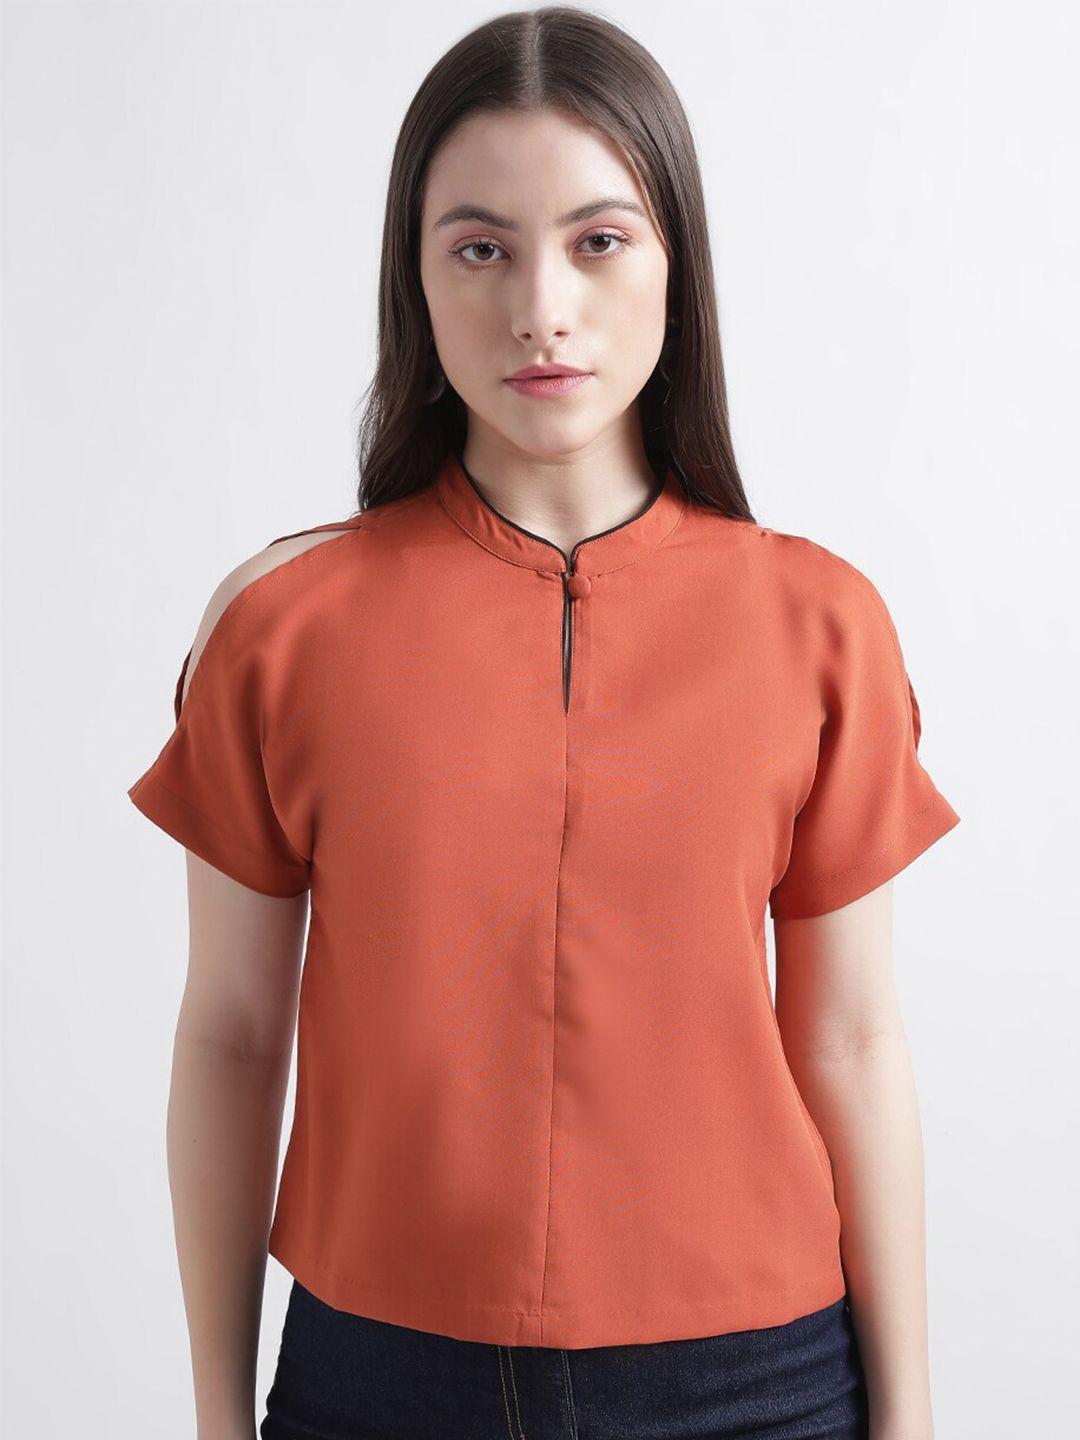 centrestage rust mandarin collar extended sleeves shirt style top